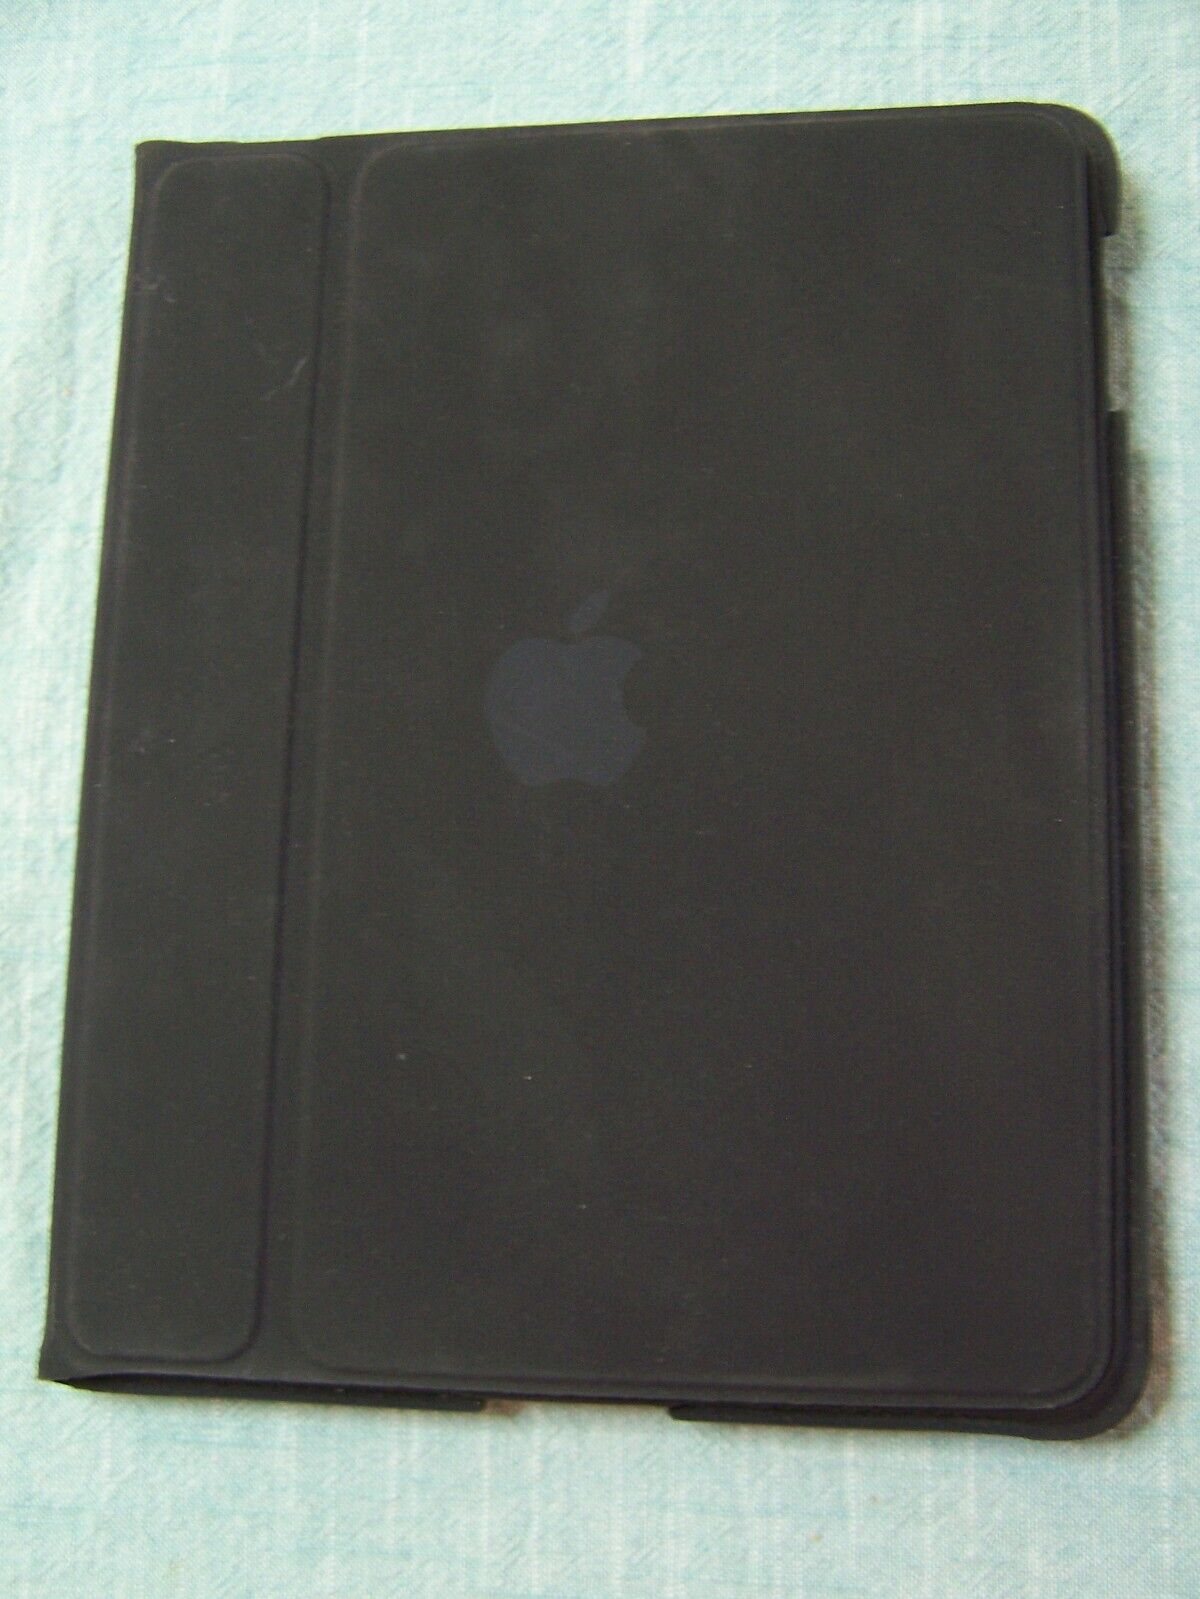  Vintage iPad with case Black 1st First Generation and 13.8 GB-iPad working 